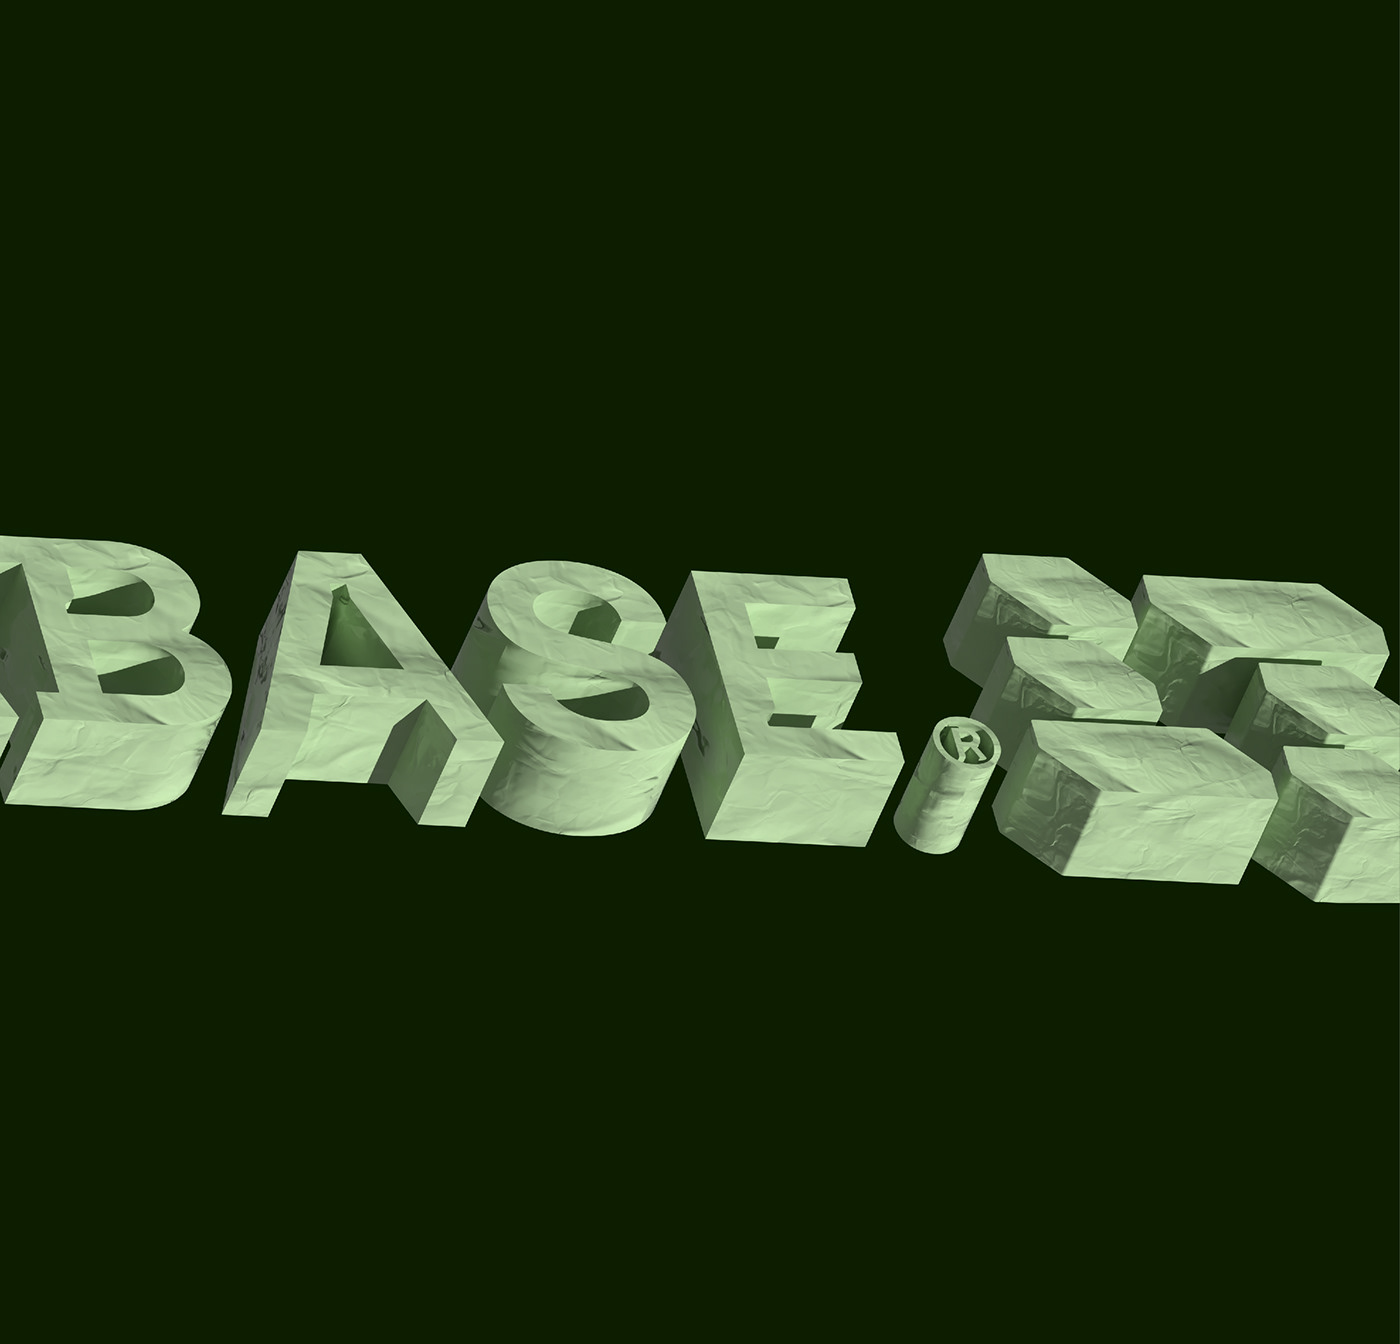 3D modeling version of Labase construction and engineering company logo.